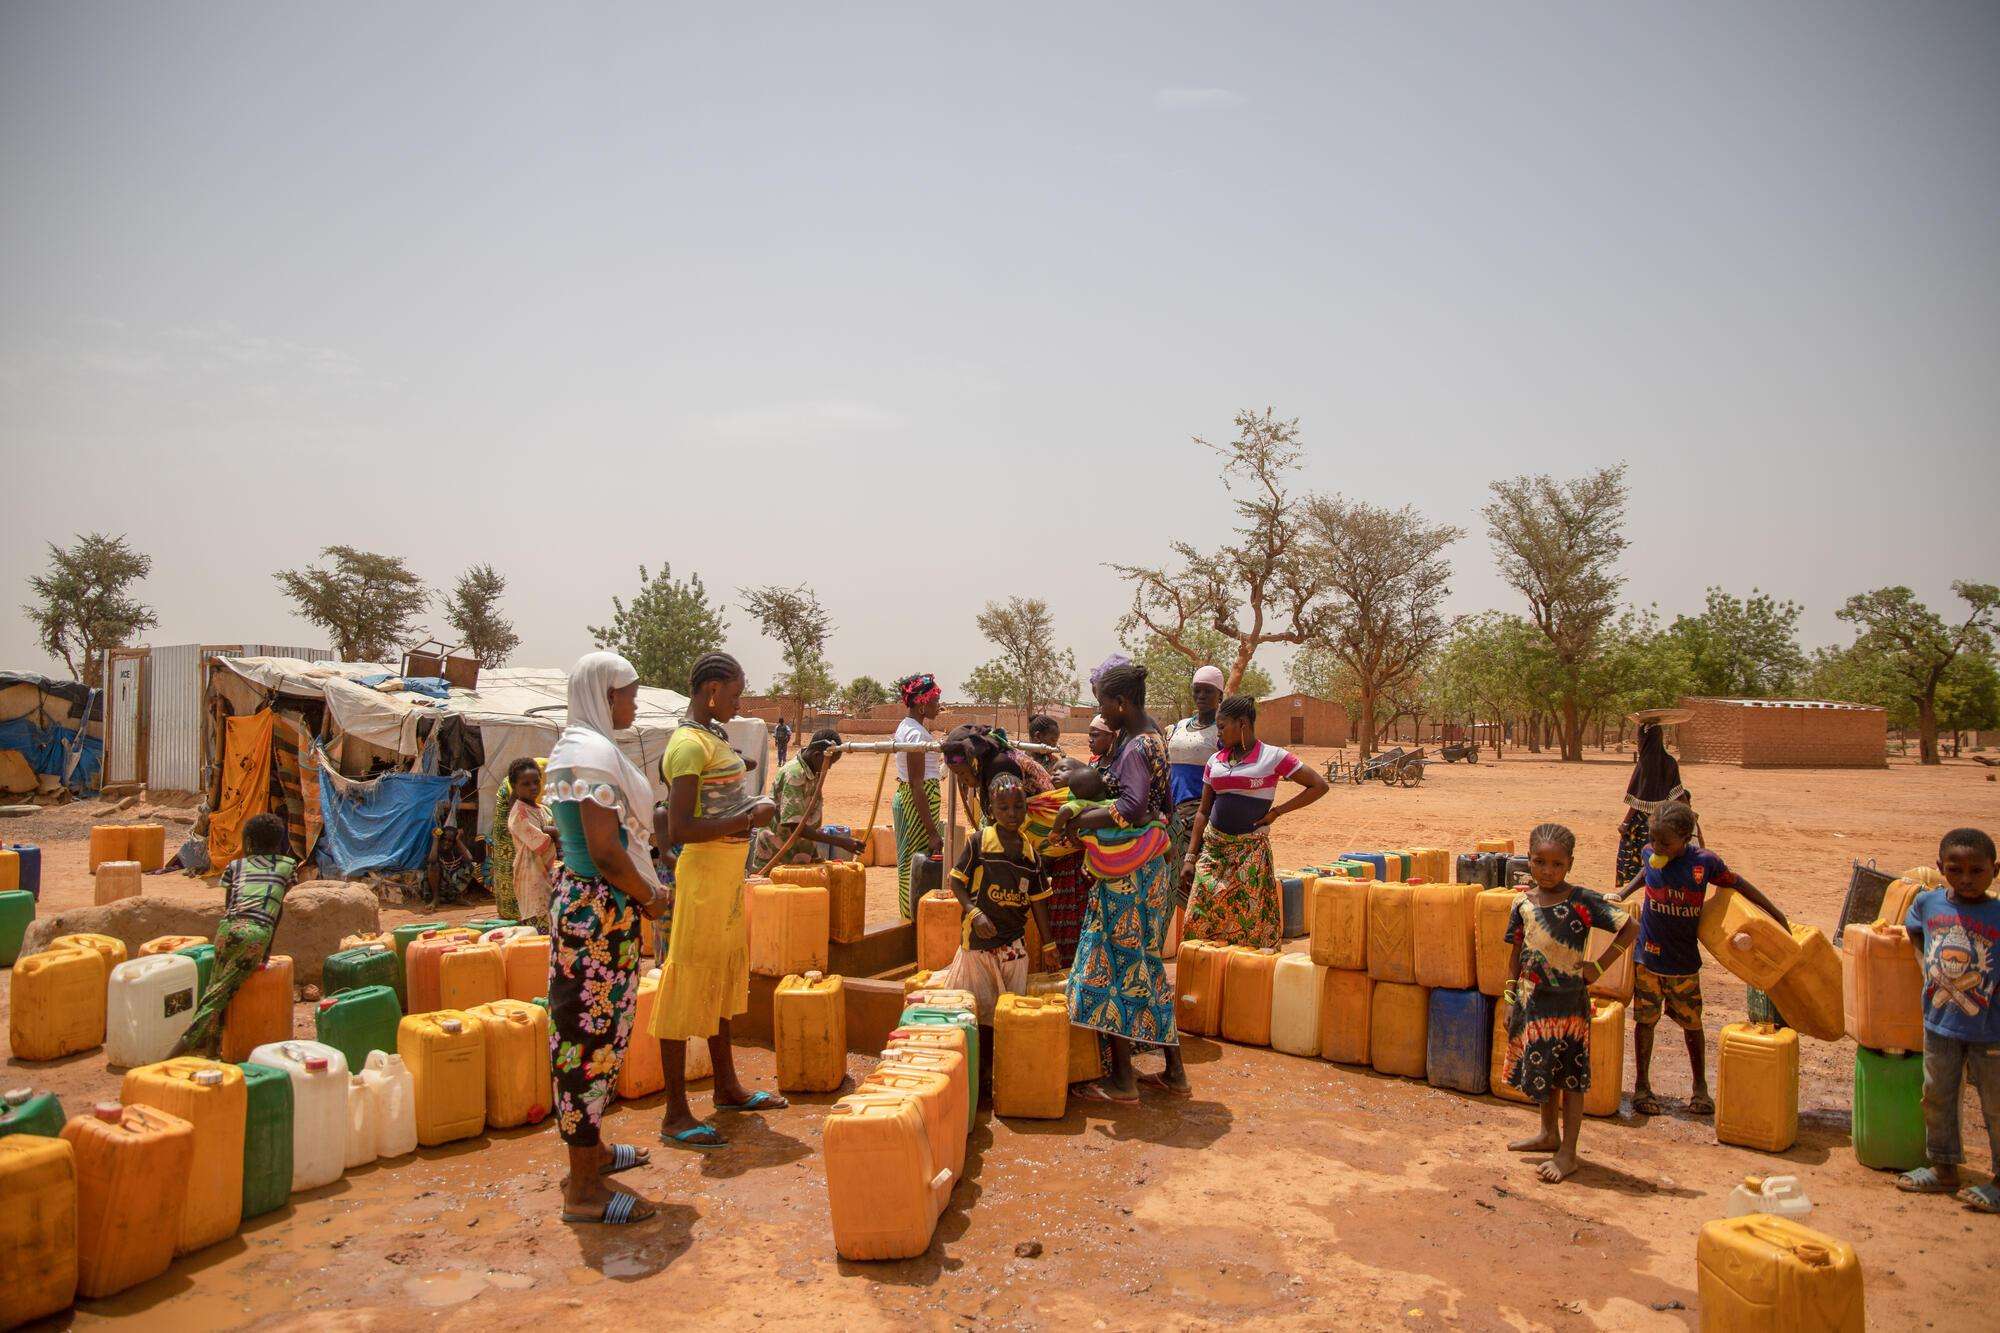 People take turns to fill their jerry cans with clean water from a pump MSF teams have provided. Kongoussi, Burkina Faso, April 2021.